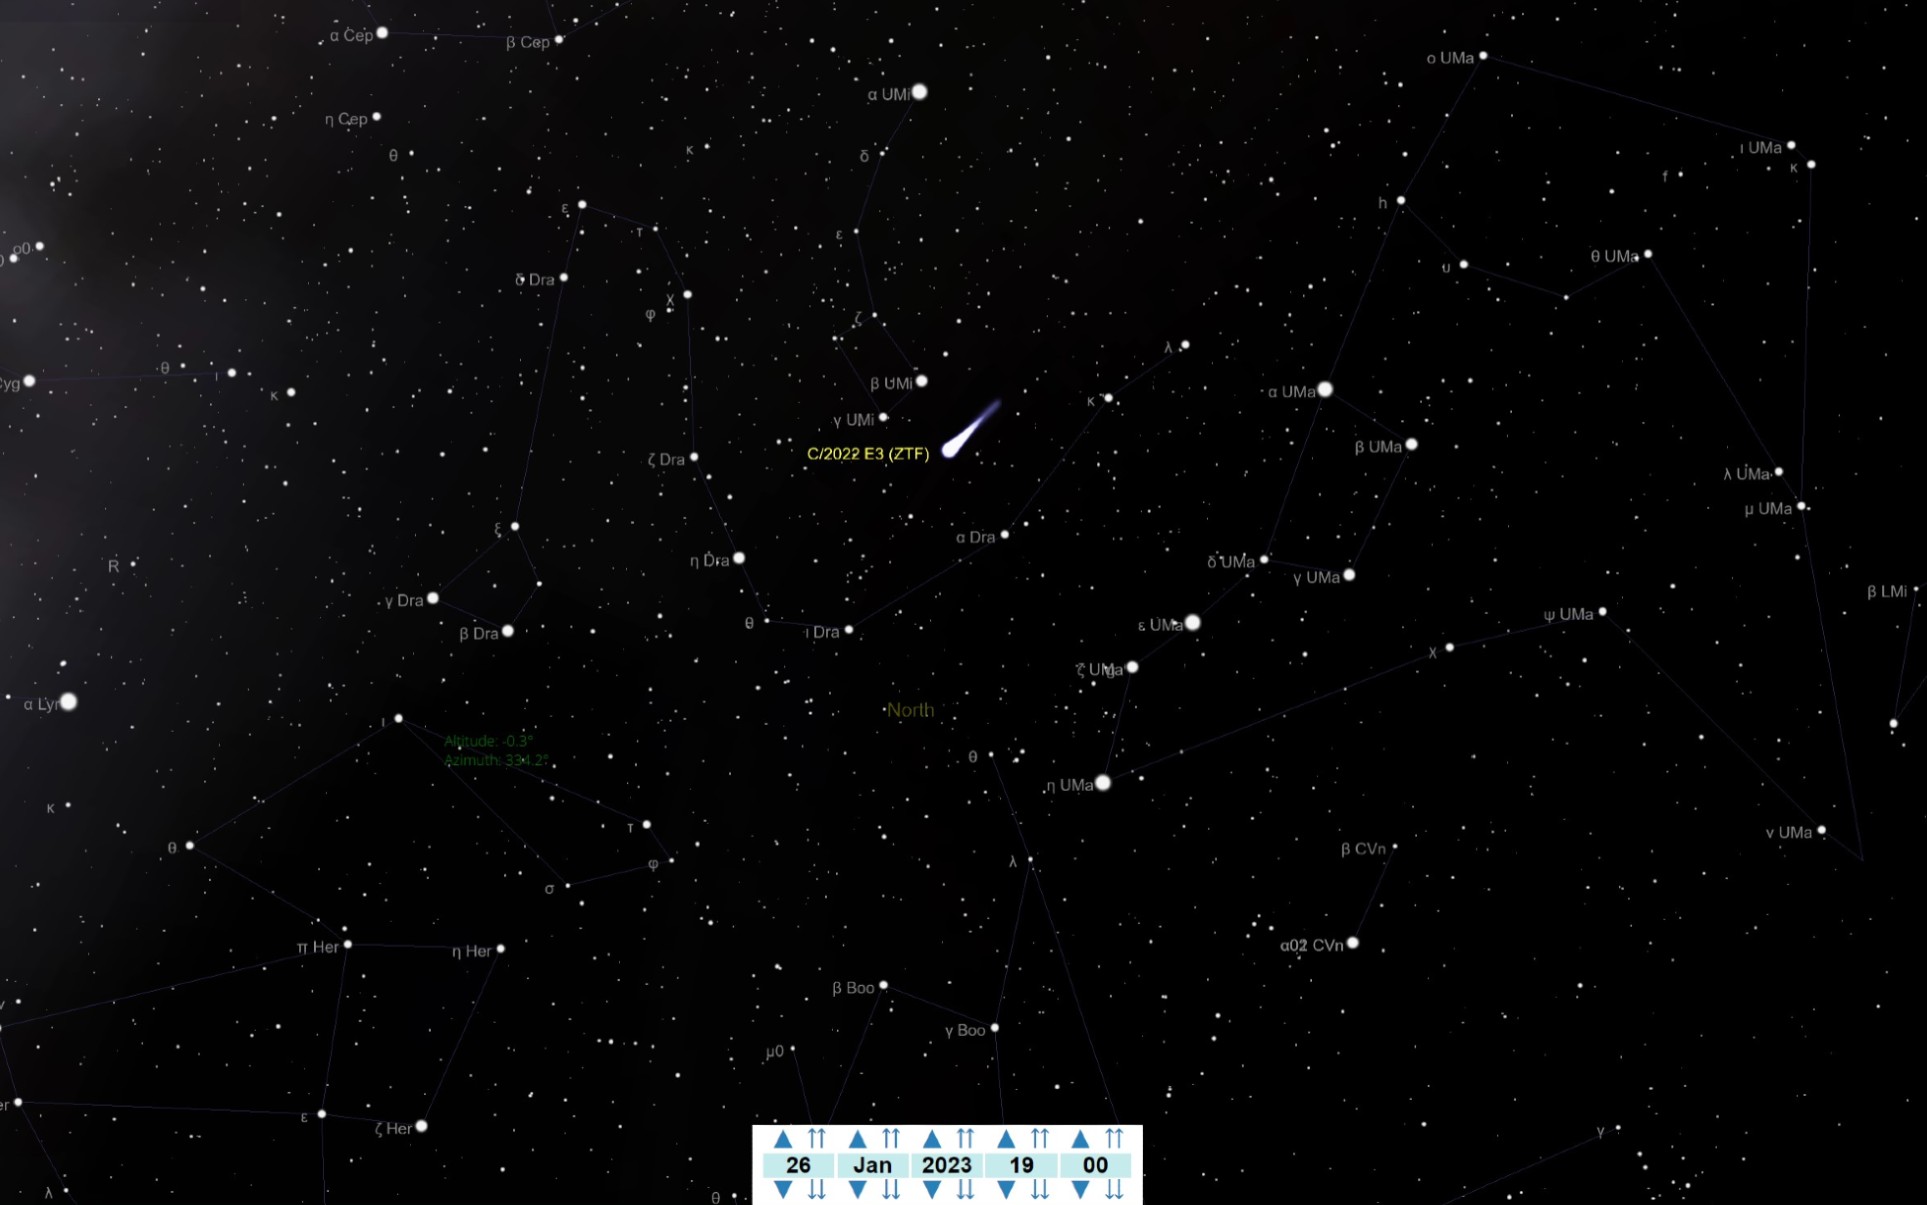 An illustration of the night sky on January 26, showing the position of Comet C/2022 E3 (ZTF) near the constellation Ursa Minor.